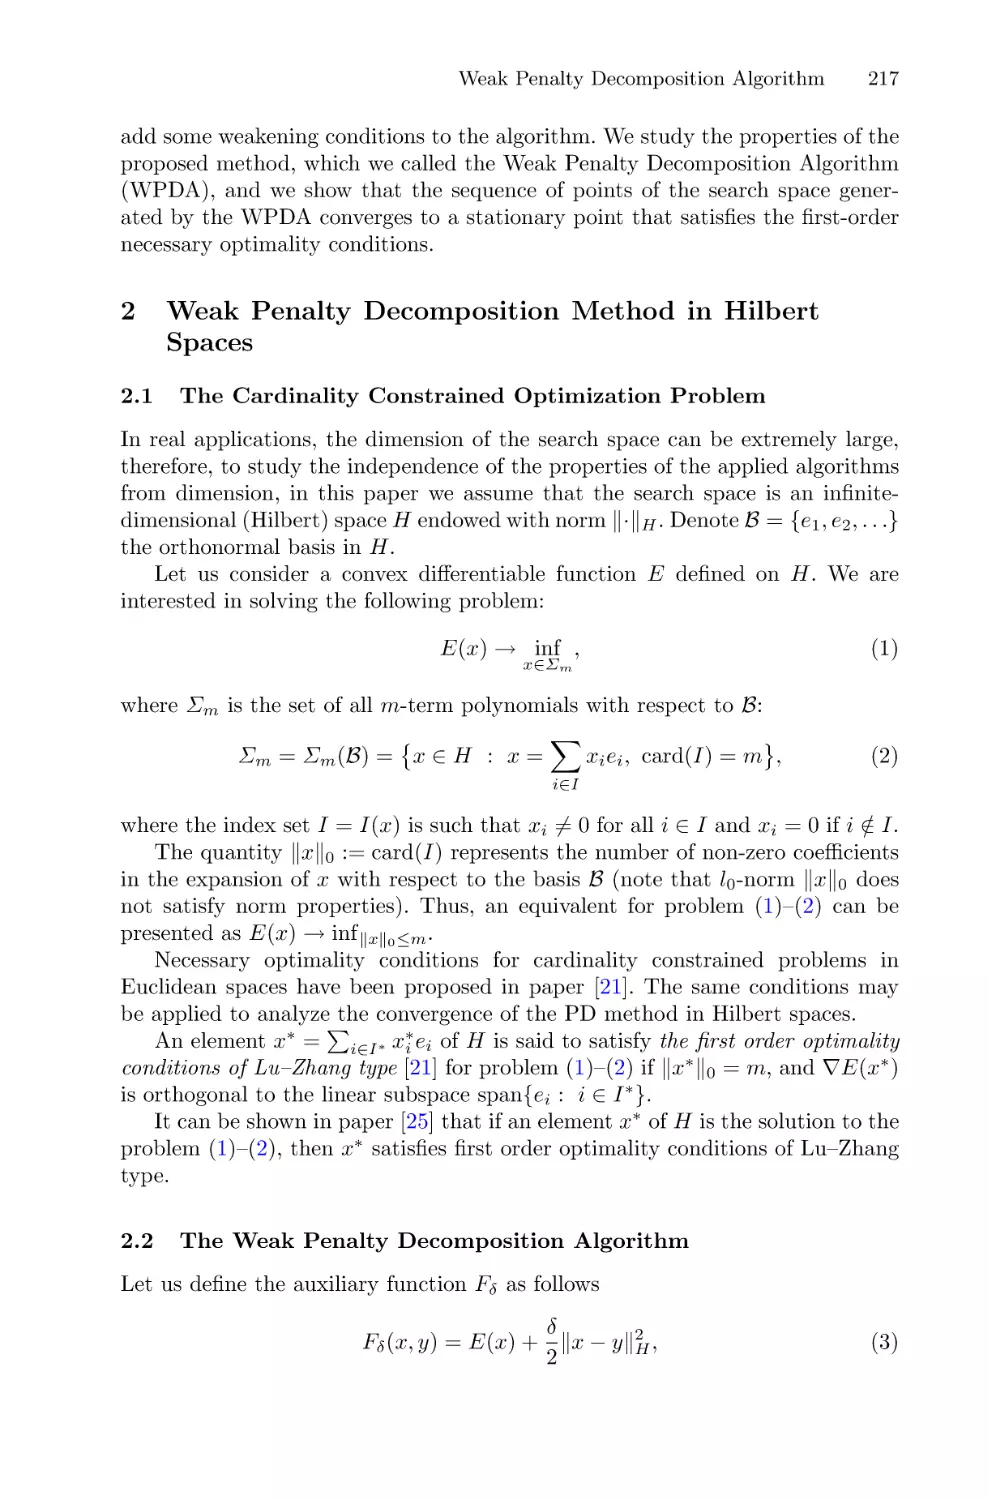 2 Weak Penalty Decomposition Method in Hilbert Spaces
2.1 The Cardinality Constrained Optimization Problem
2.2 The Weak Penalty Decomposition Algorithm